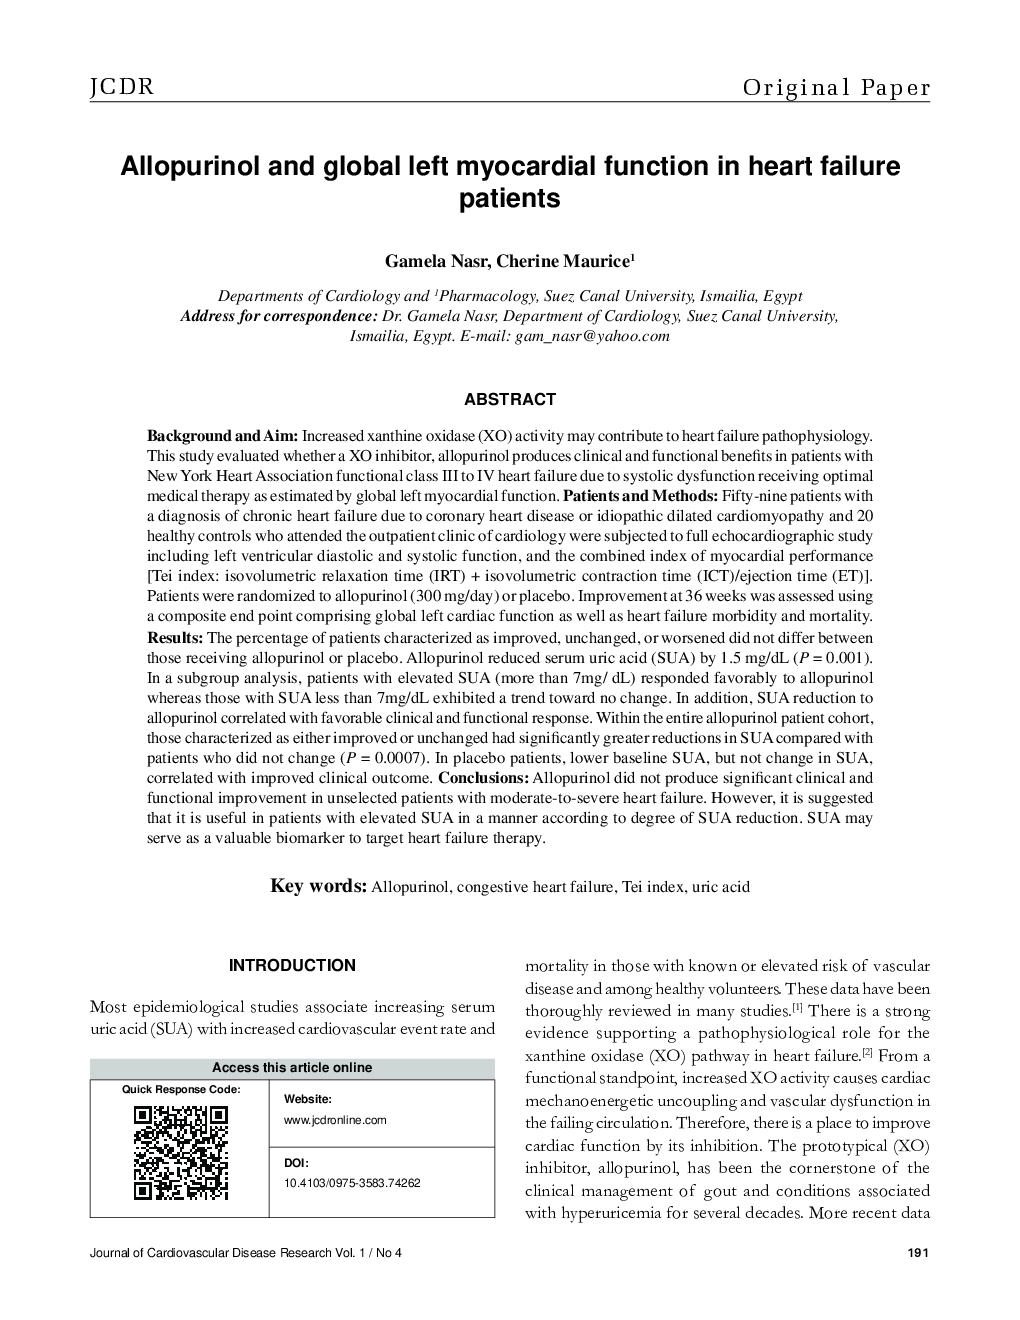 Allopurinol and global left myocardial function in heart failure patients